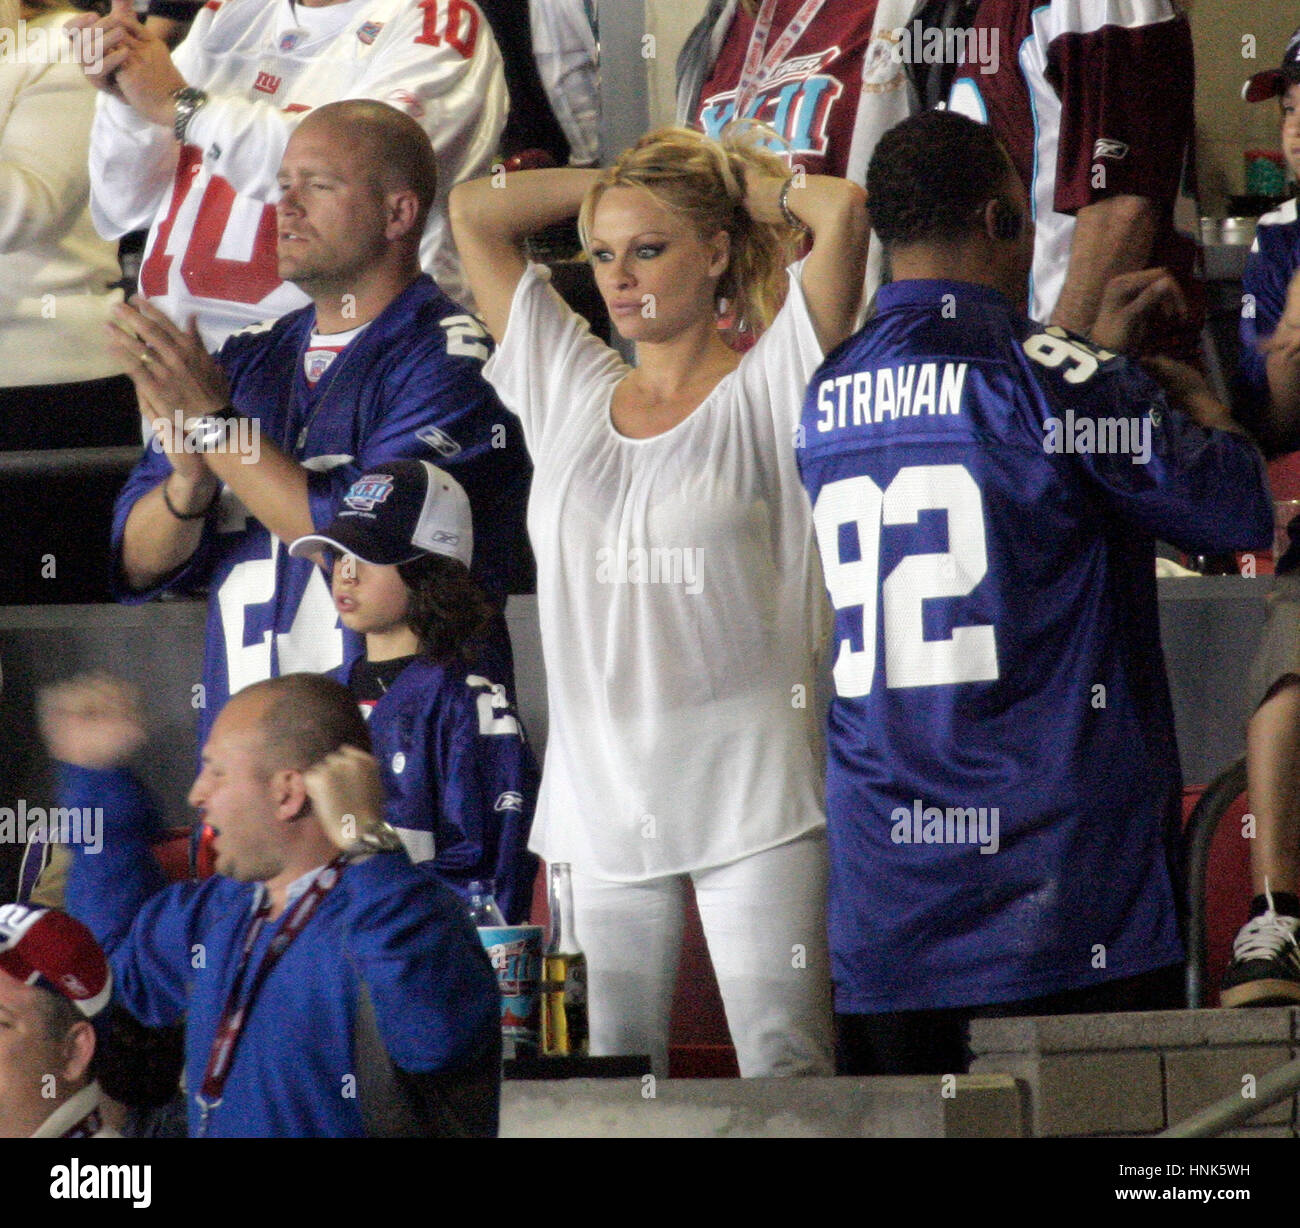 Pamela Anderson in the stands at Super Bowl XXLII in Glendale, AZ on Sunday, Feb. 3, 2008. Photo by Francis Specker Stock Photo